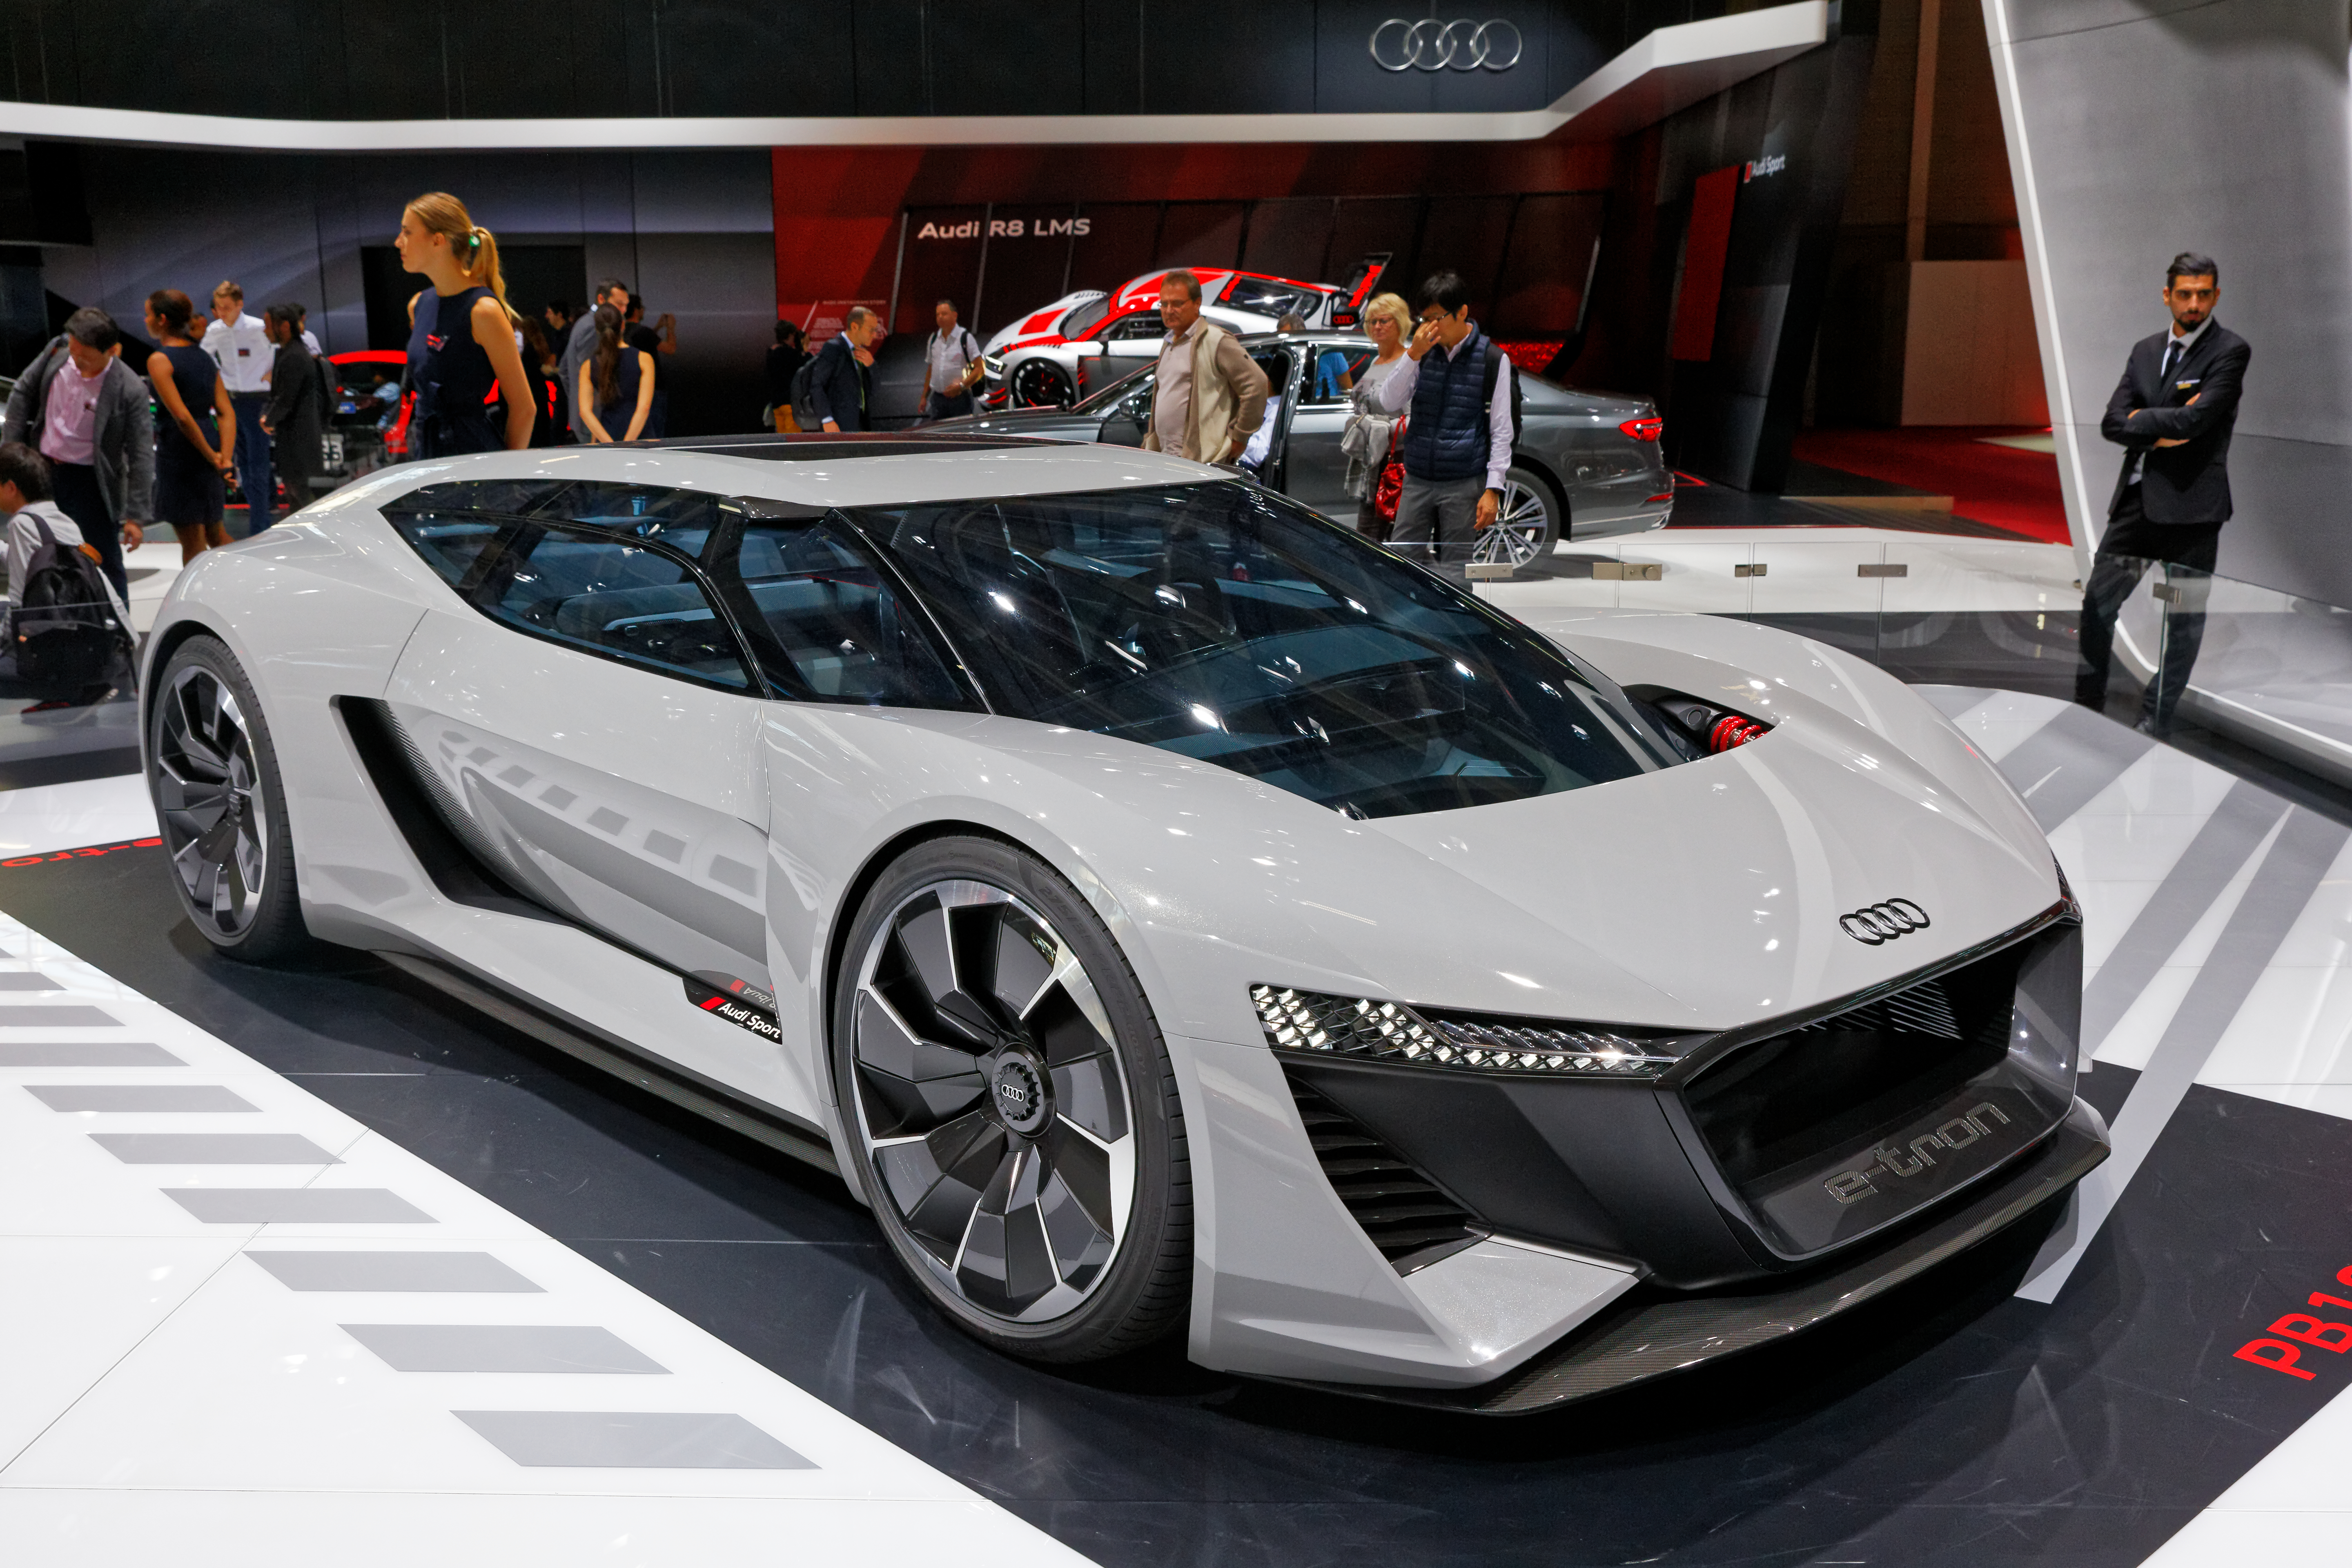 bao john wick surprised everyone by being the first owner of the audi r super sports car the world s fastest future supercar 6548cadc8ec95 John Wick Surprised Everyone By Being The First Owner Of The 2023 Audi R10 Super Sports Car, The World's Fastest Future Supercar